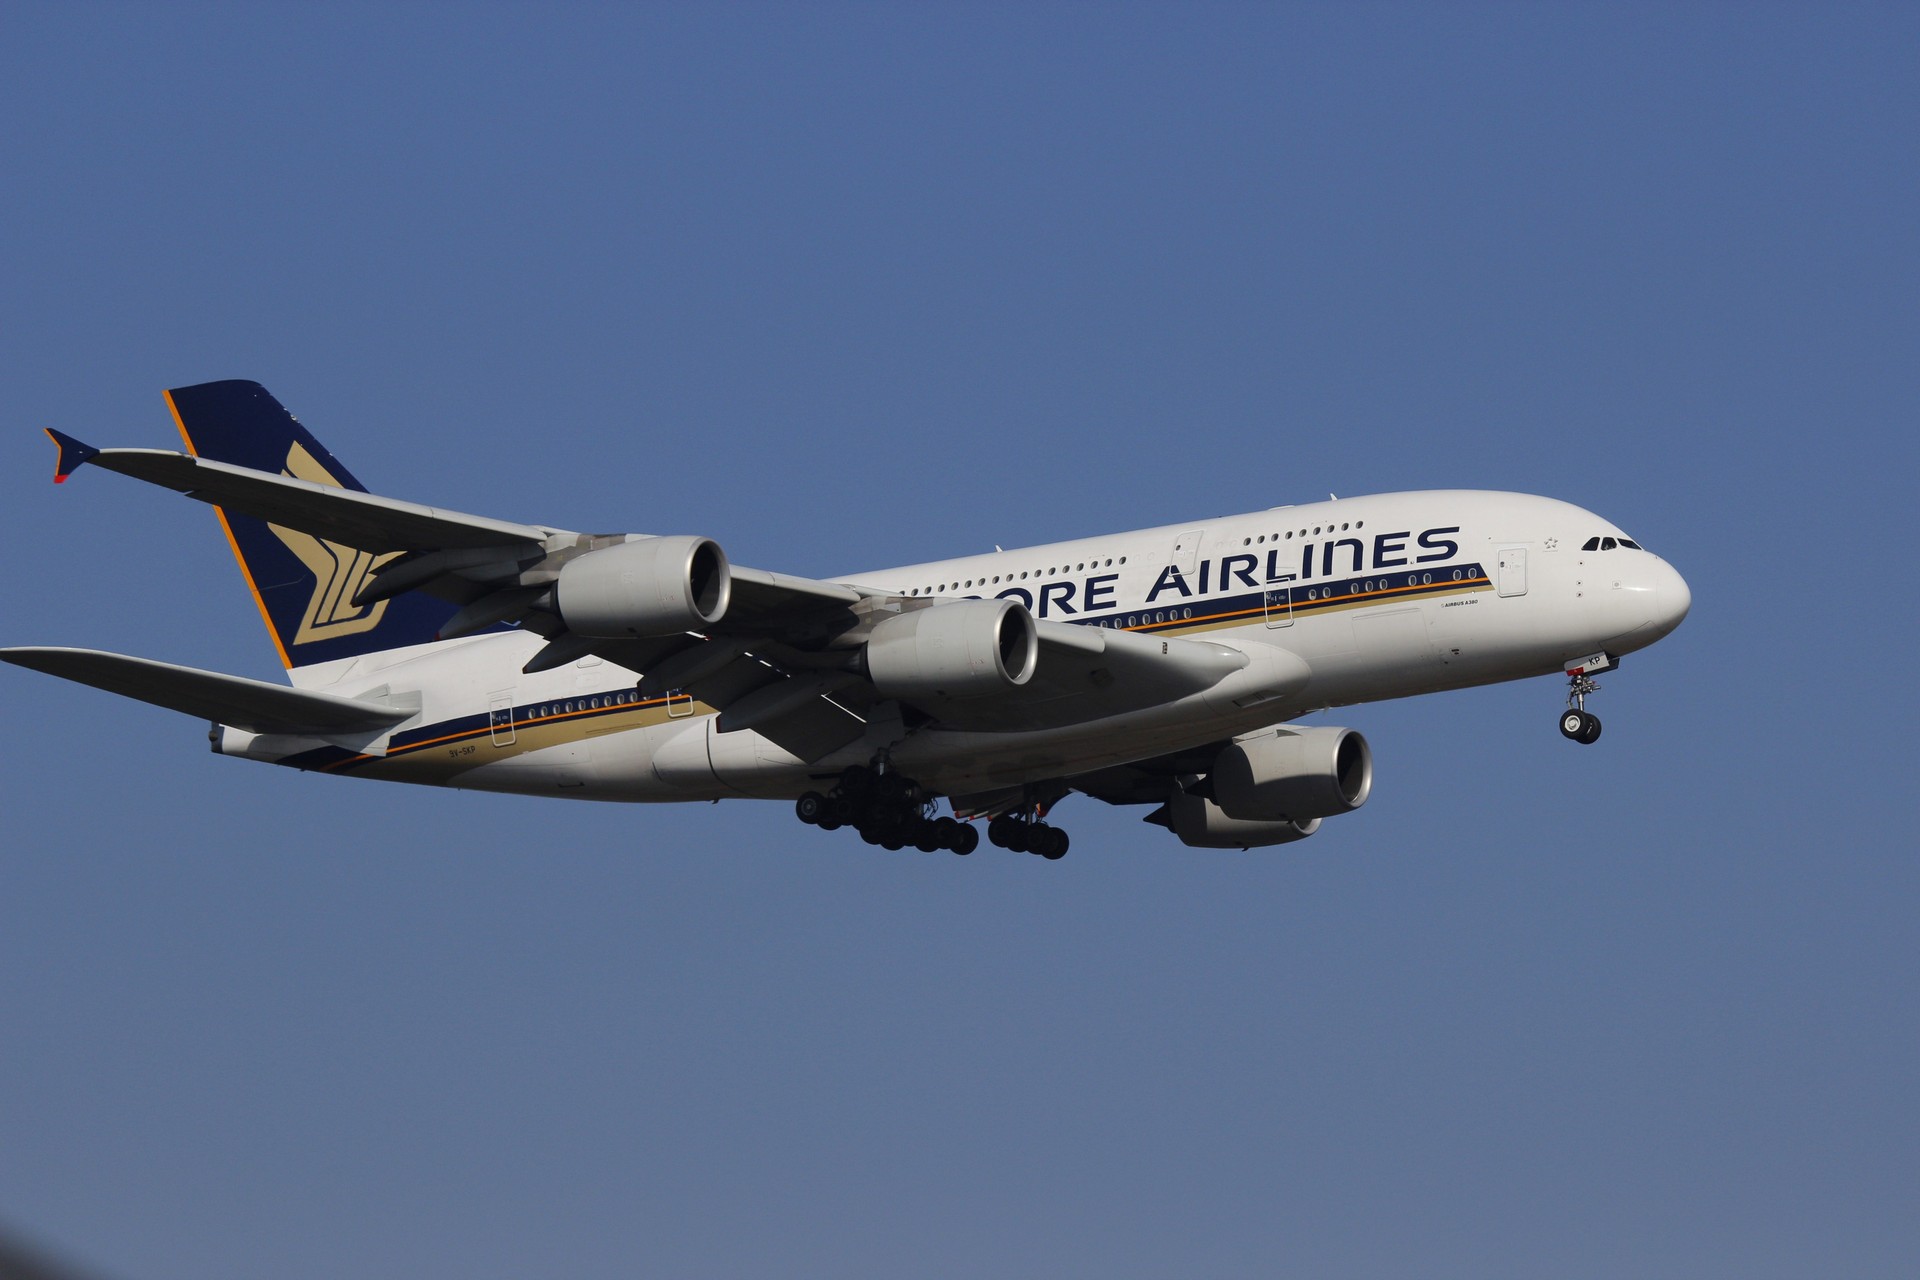 Singapore Airlines Airbus A380 - Singapore Airlines - HD Wallpaper 